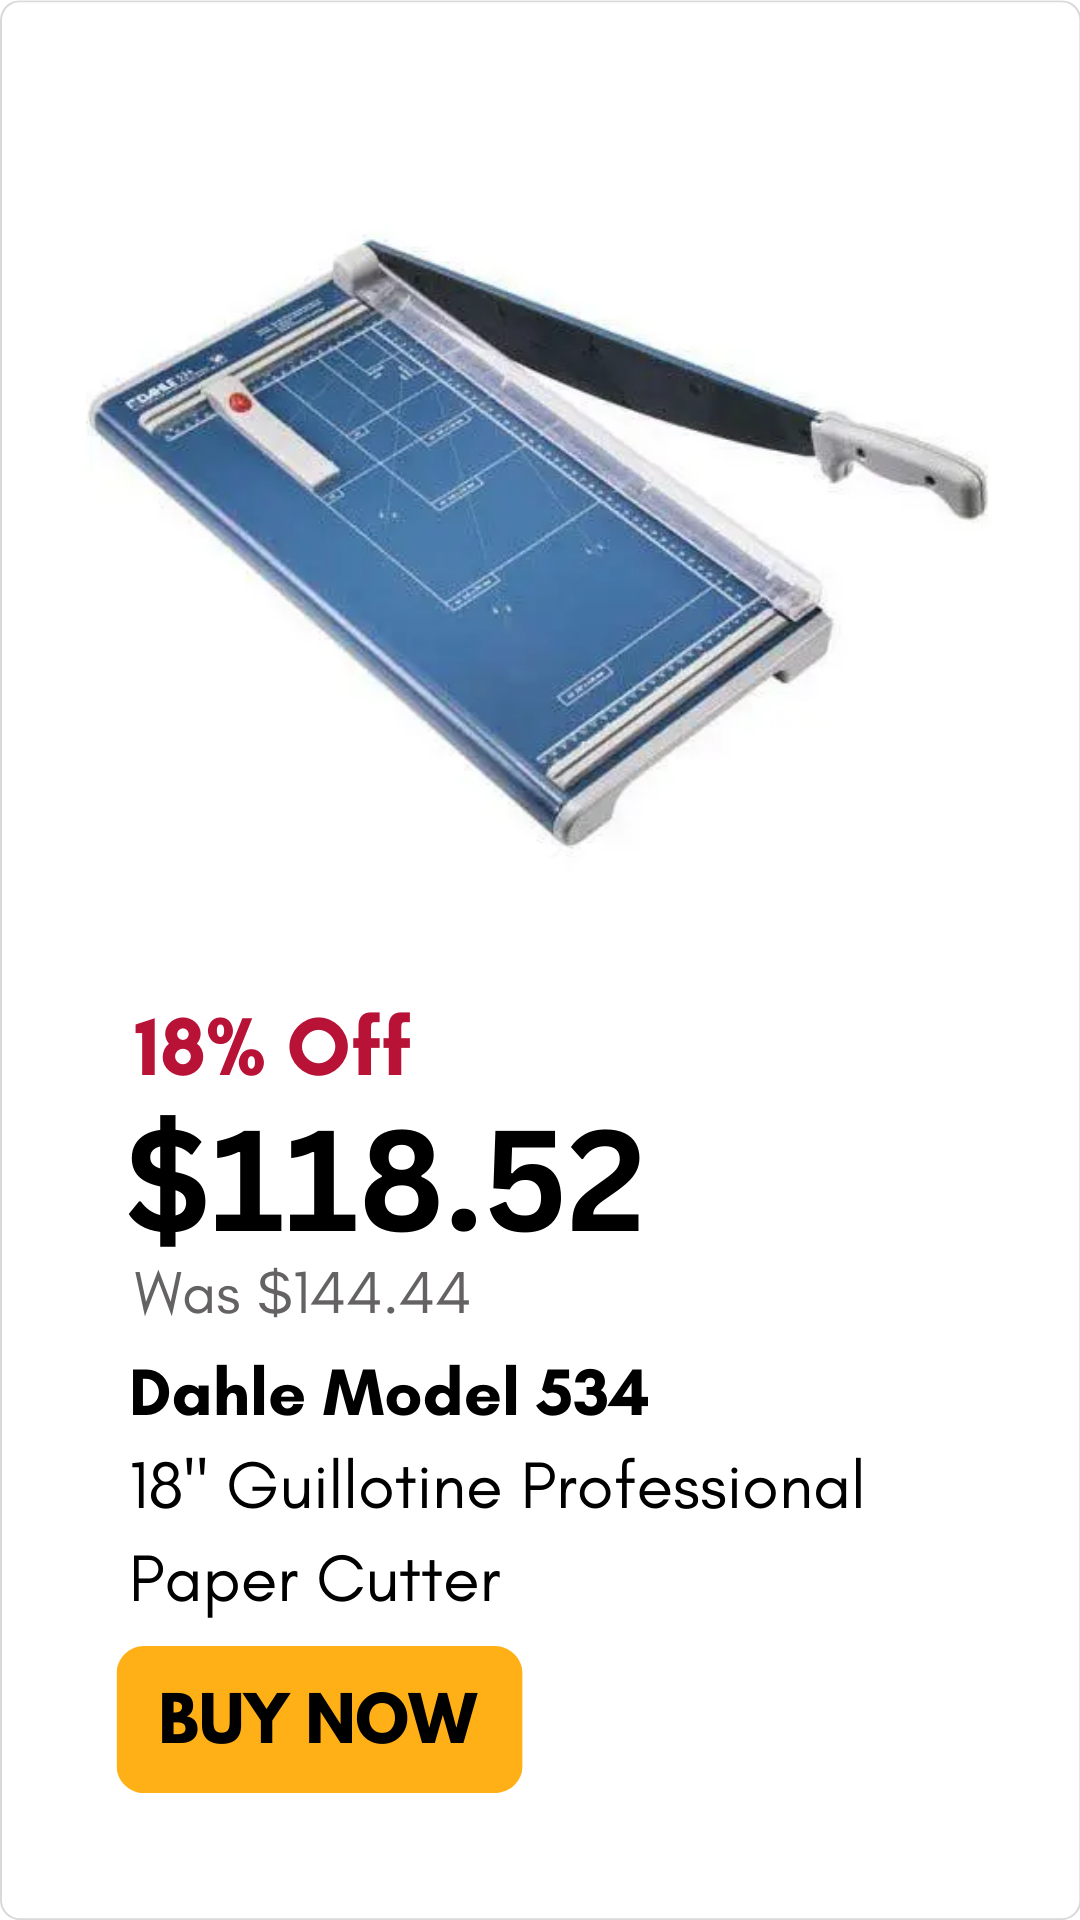 Dahle Model 534 Professional 18 Inch Guillotine Paper Cutter